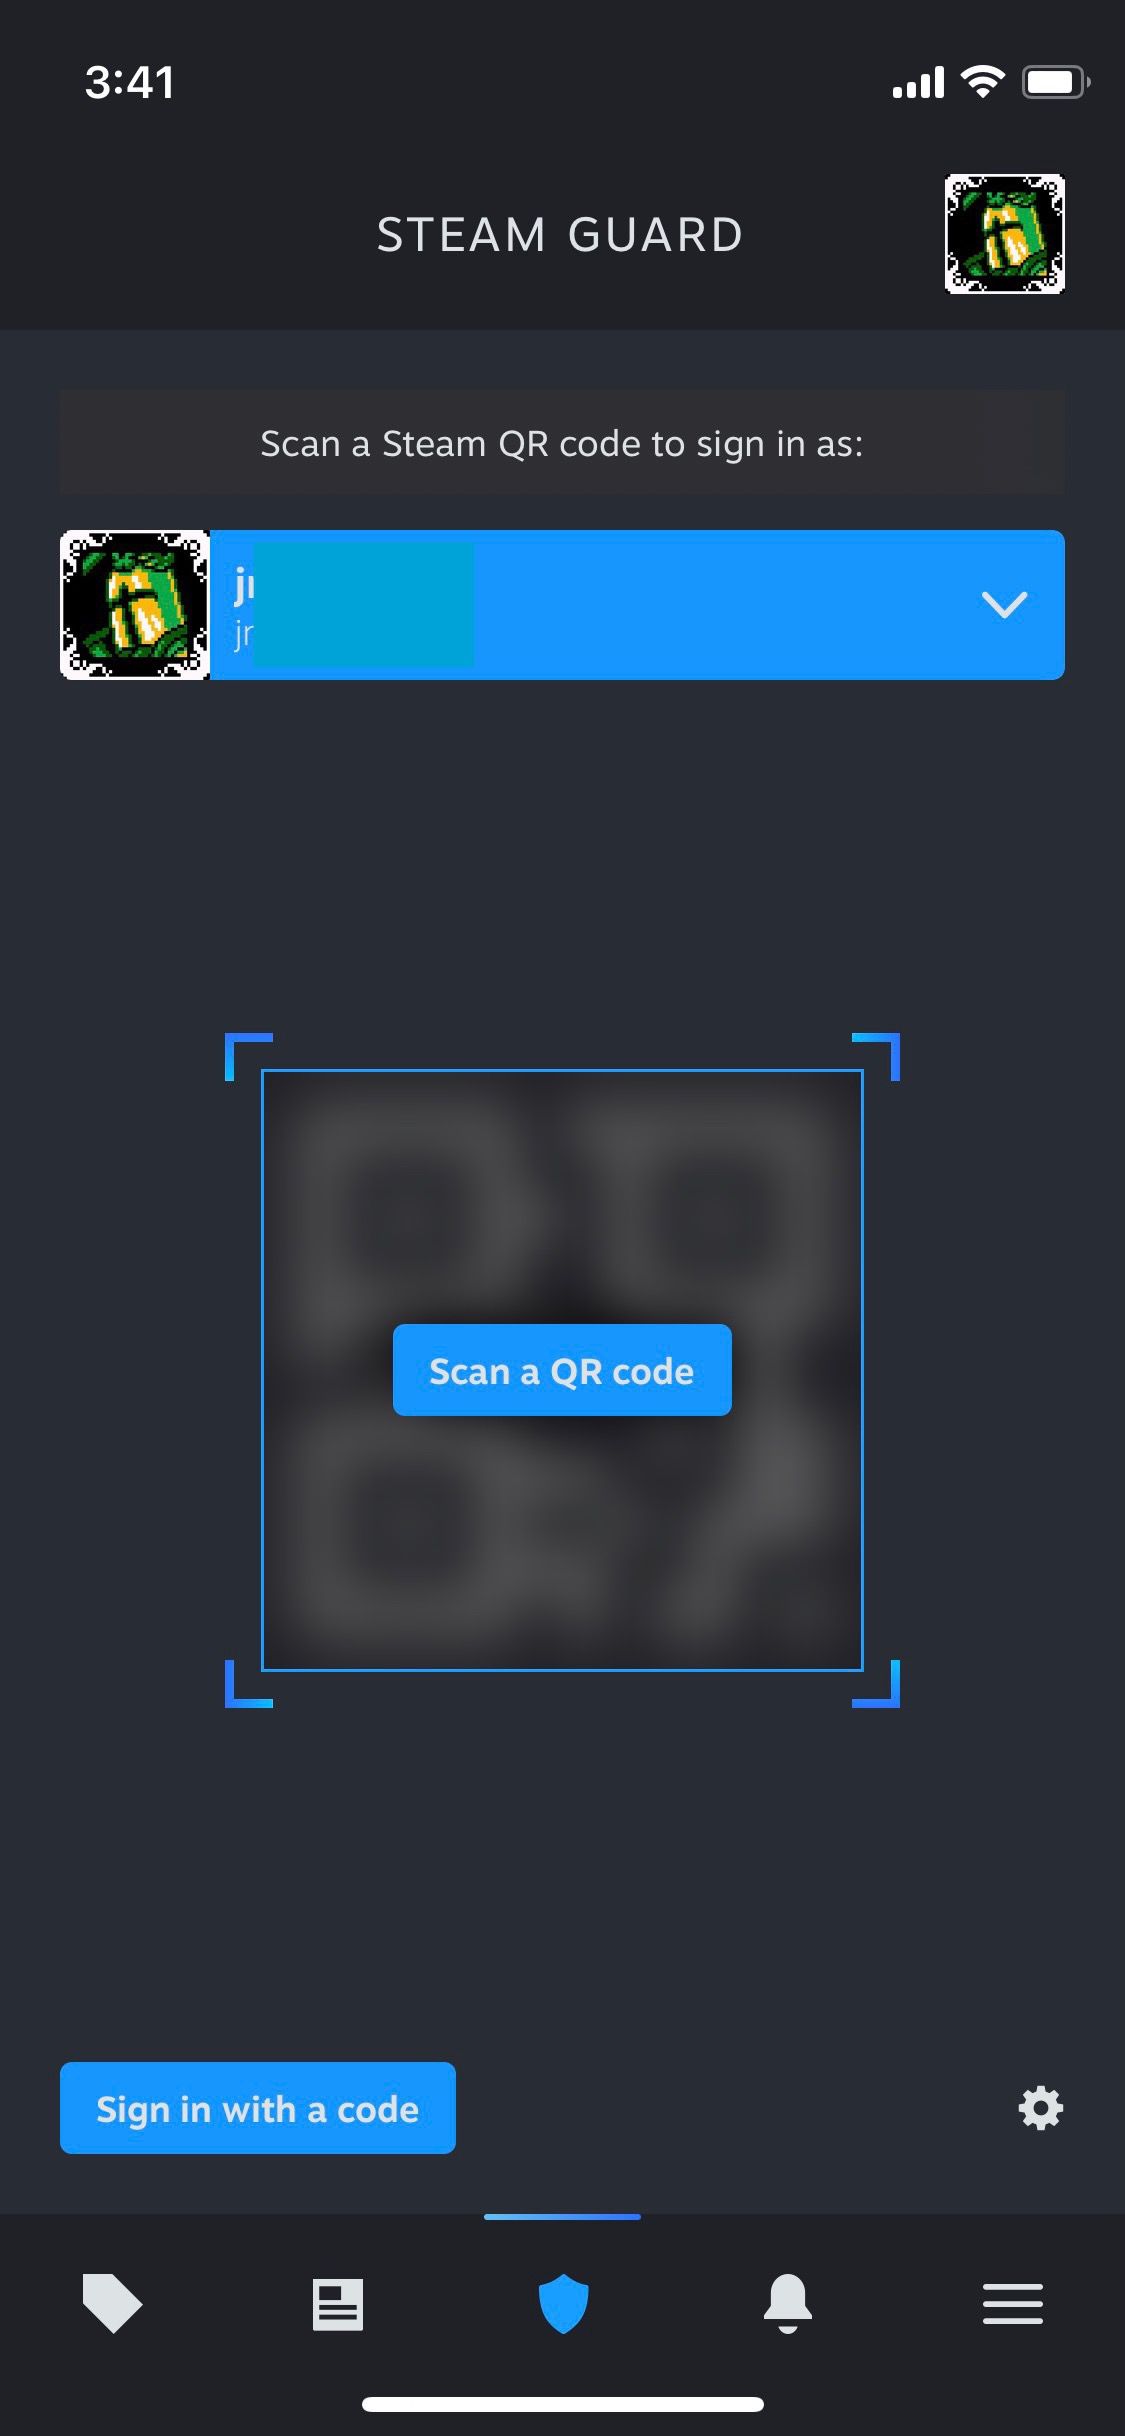 The screen where you can scan a QR code in Steam’s new mobile app. There are buttons to sign in with a QR code or with another code.